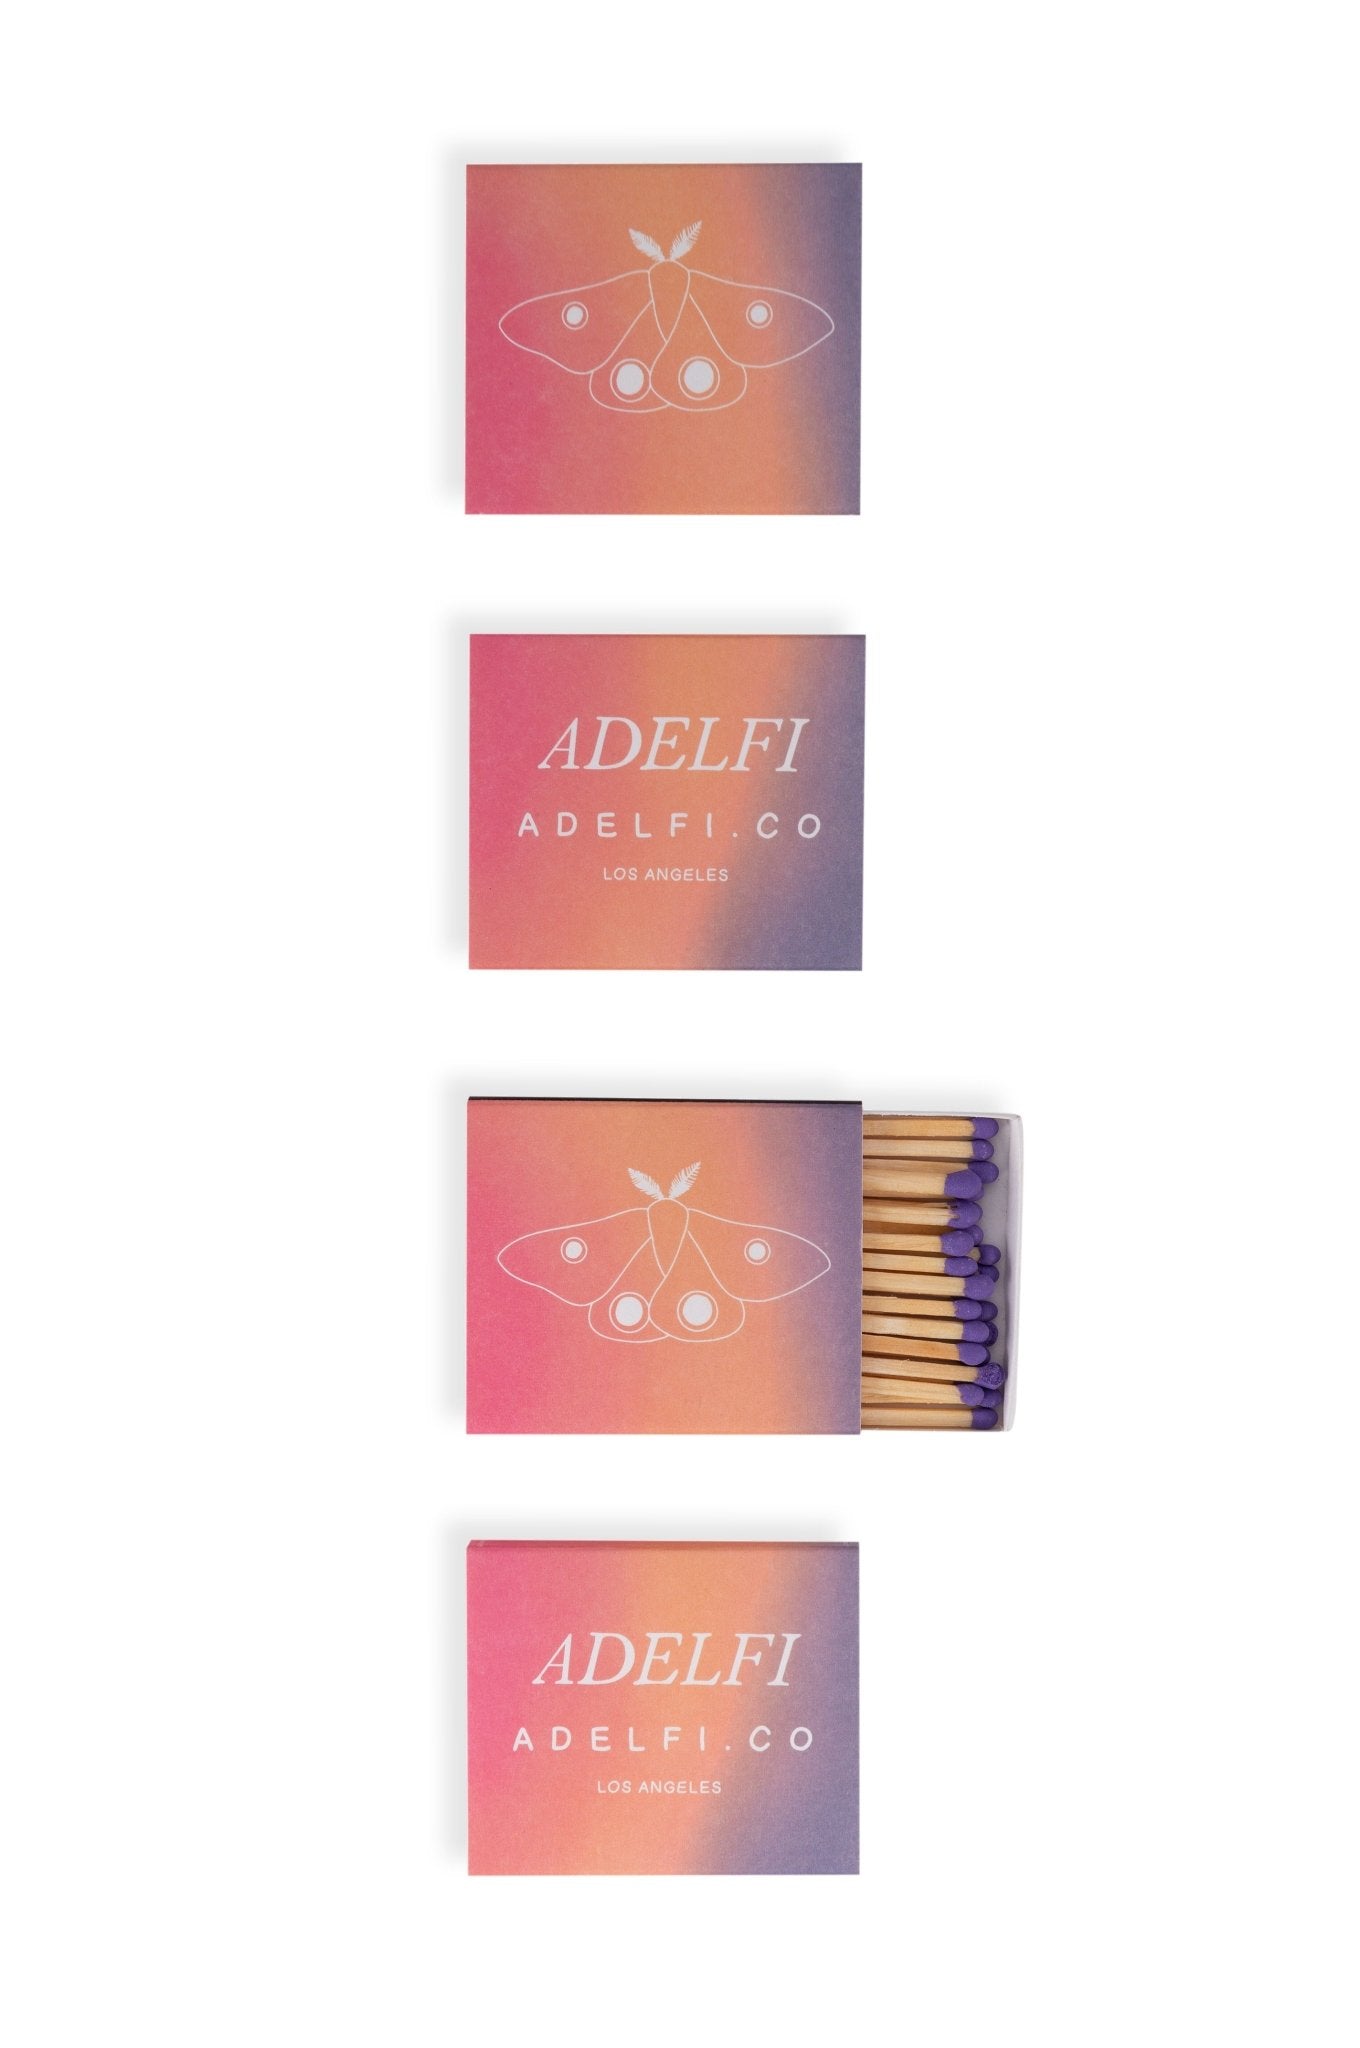 Four Adelfi matchboxes front, back, and open